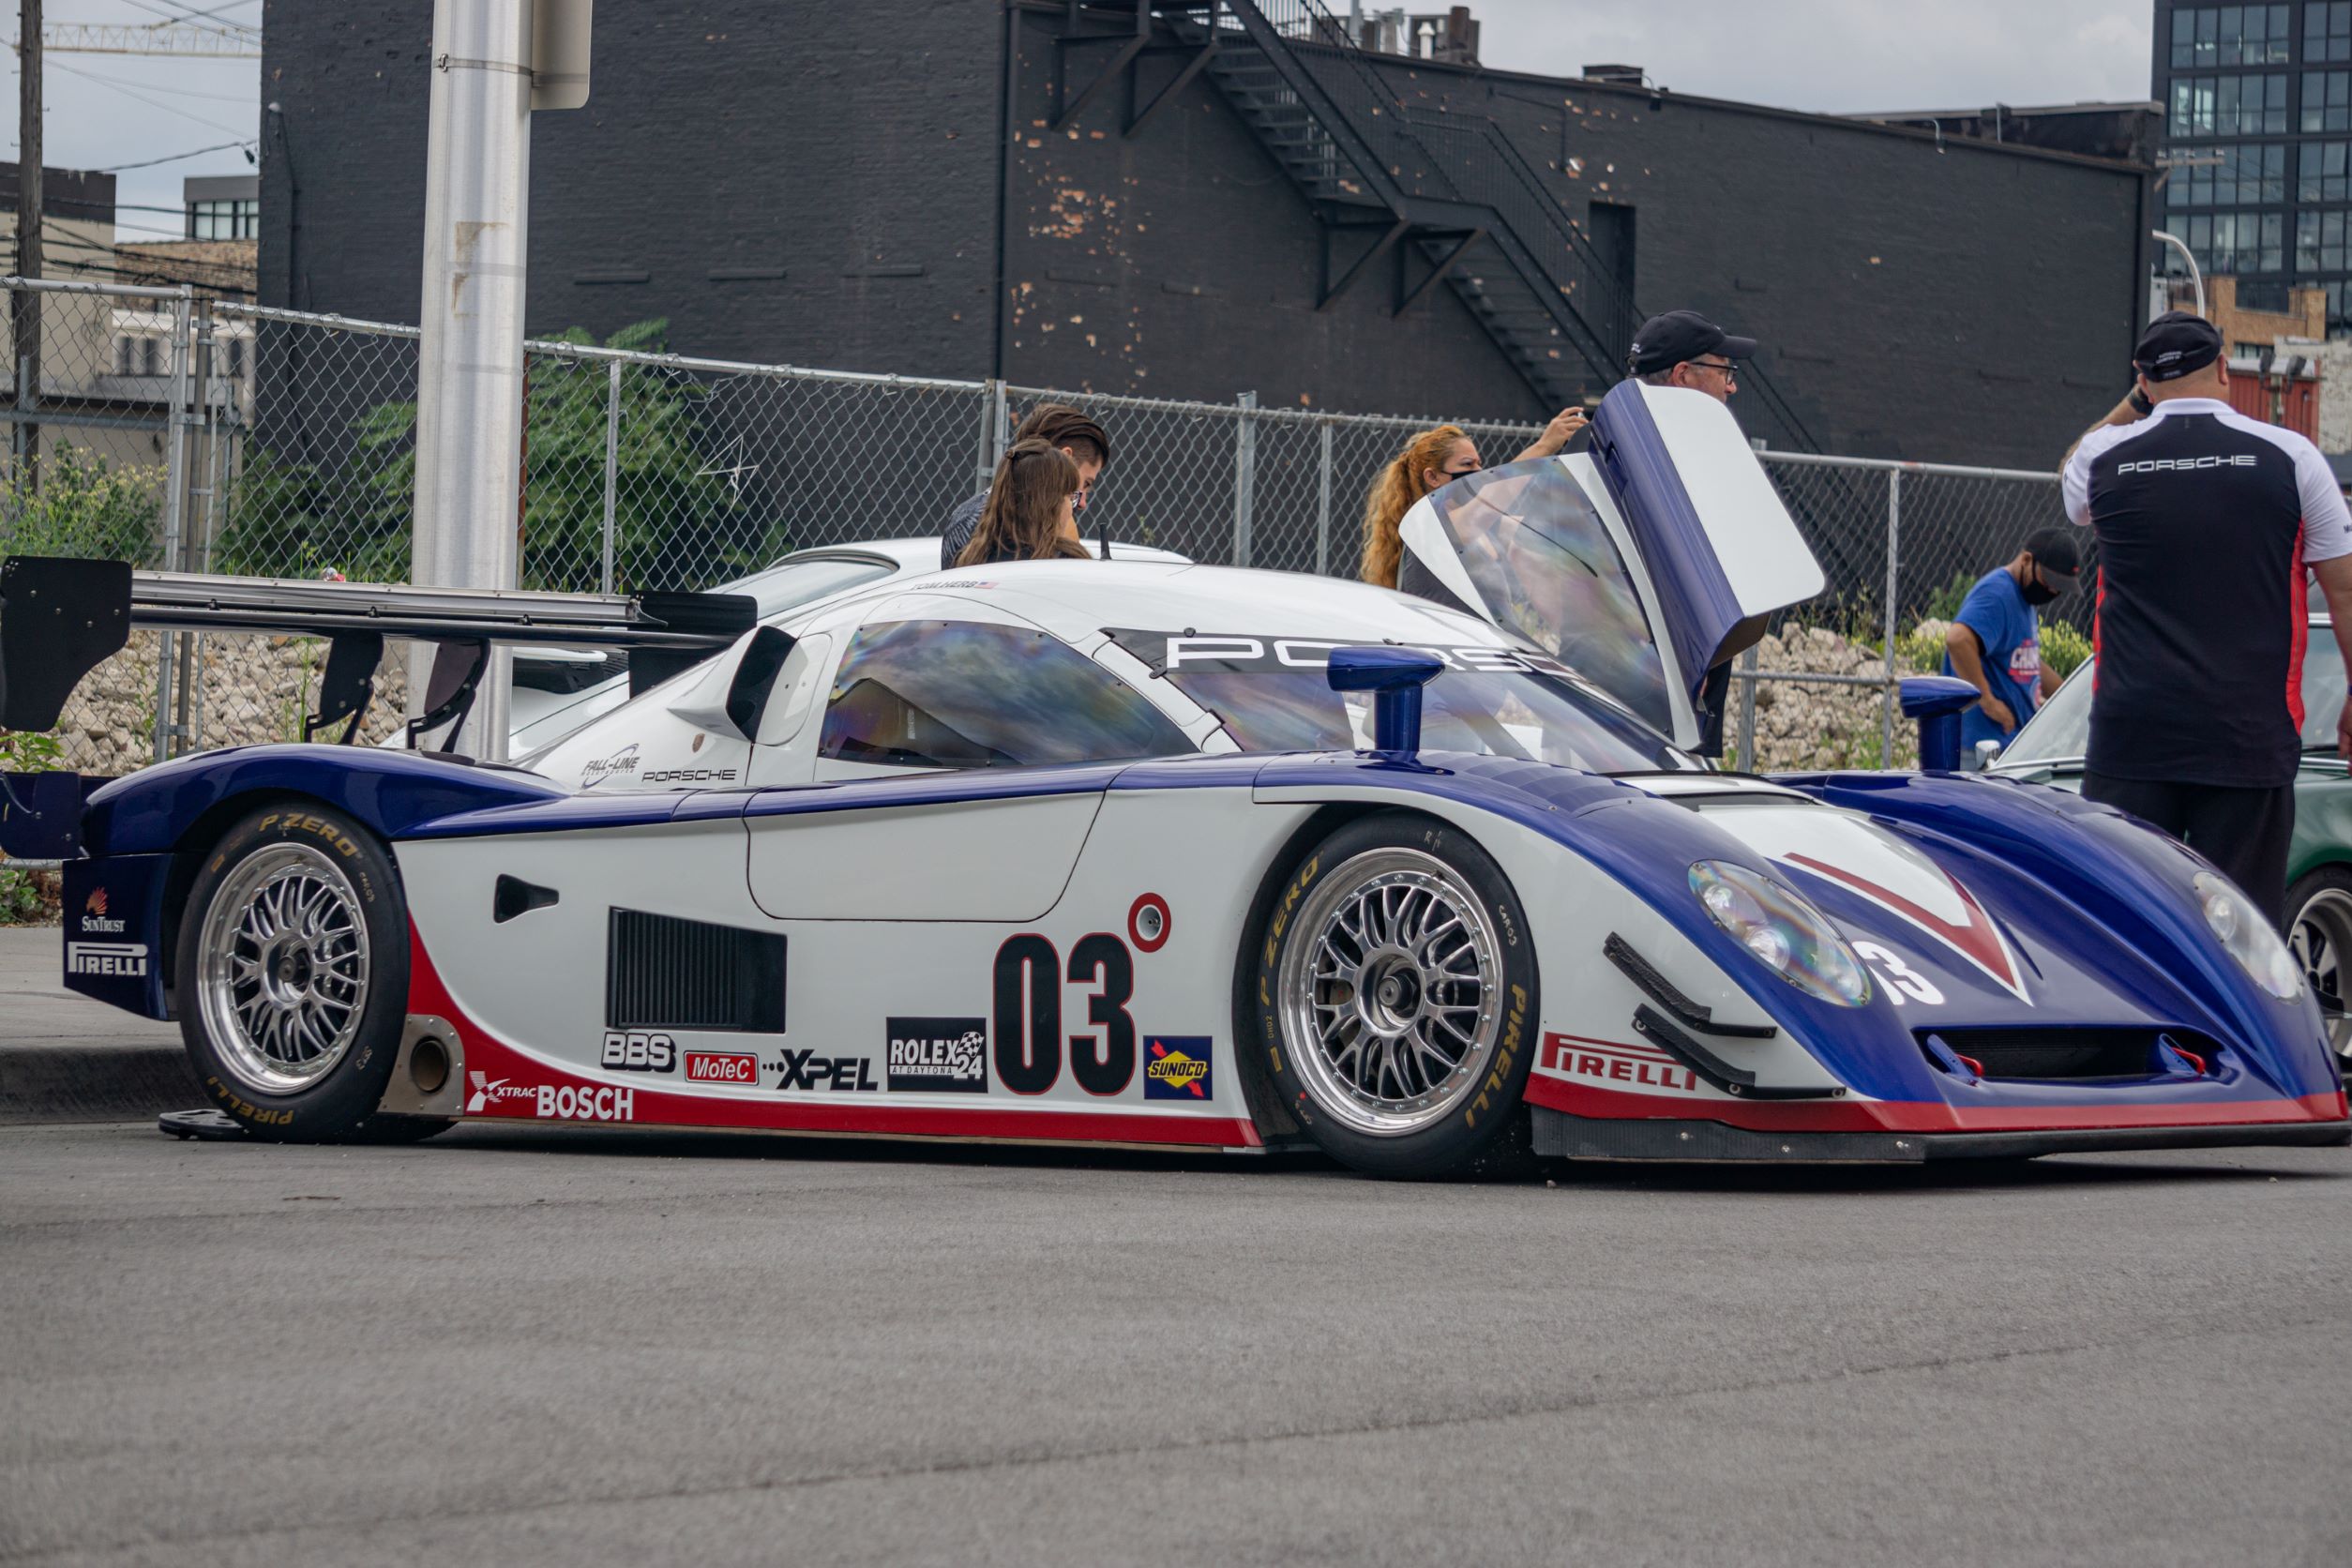 Fall-Line Motorsports' white-blue-and-red Porsche Crawford Daytona Prototype at Checkeditout